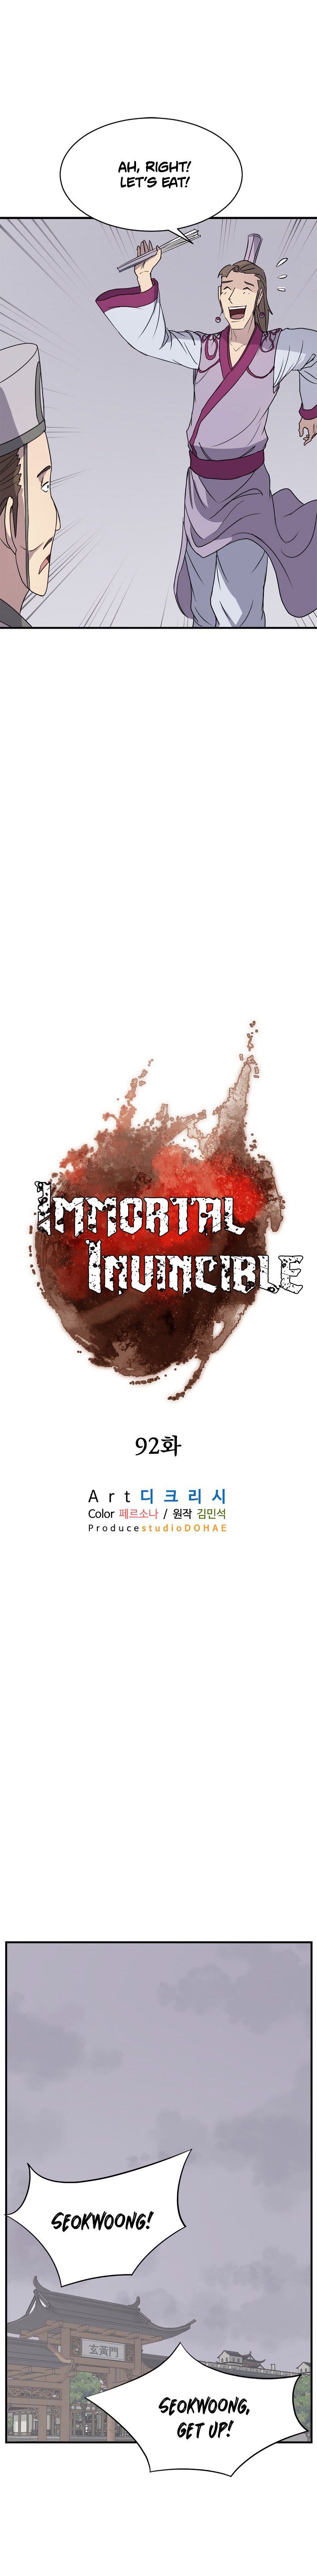 Immortal Invincible Chapter 92 Page 4